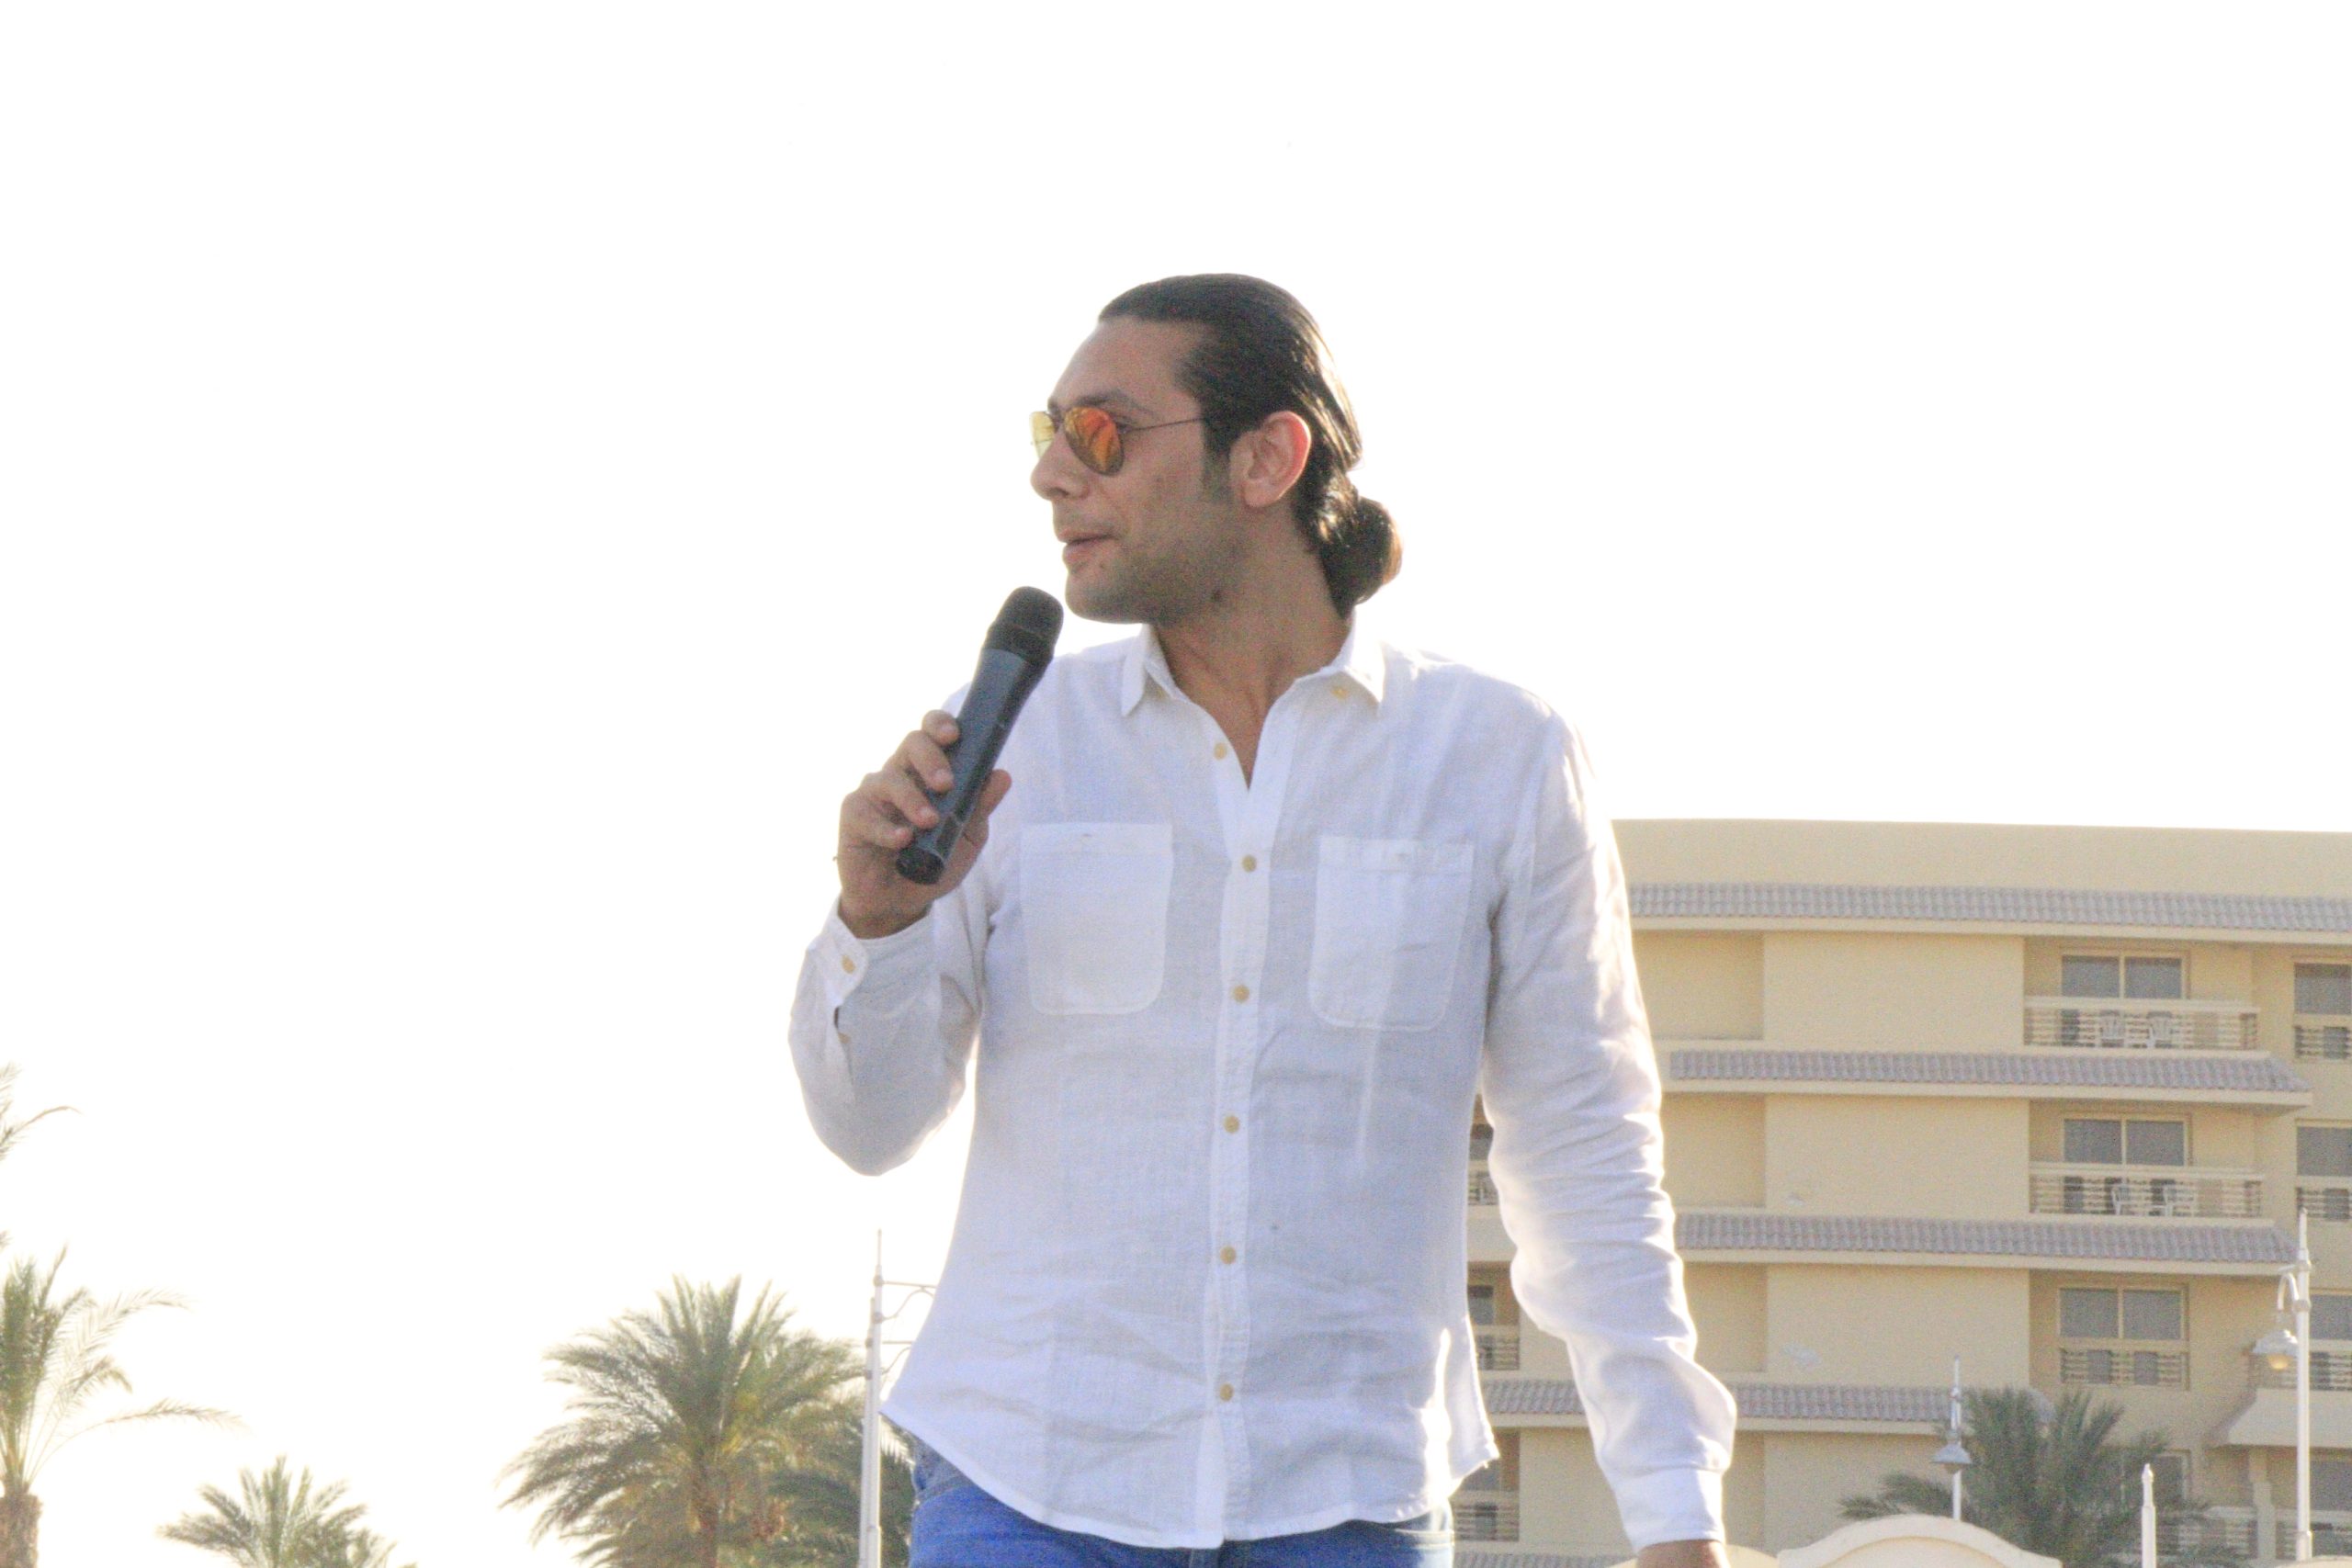 Ramy Ayoub Red Sea Academy's Founder & Managing Director speech talking about the Red Sea Academy Project